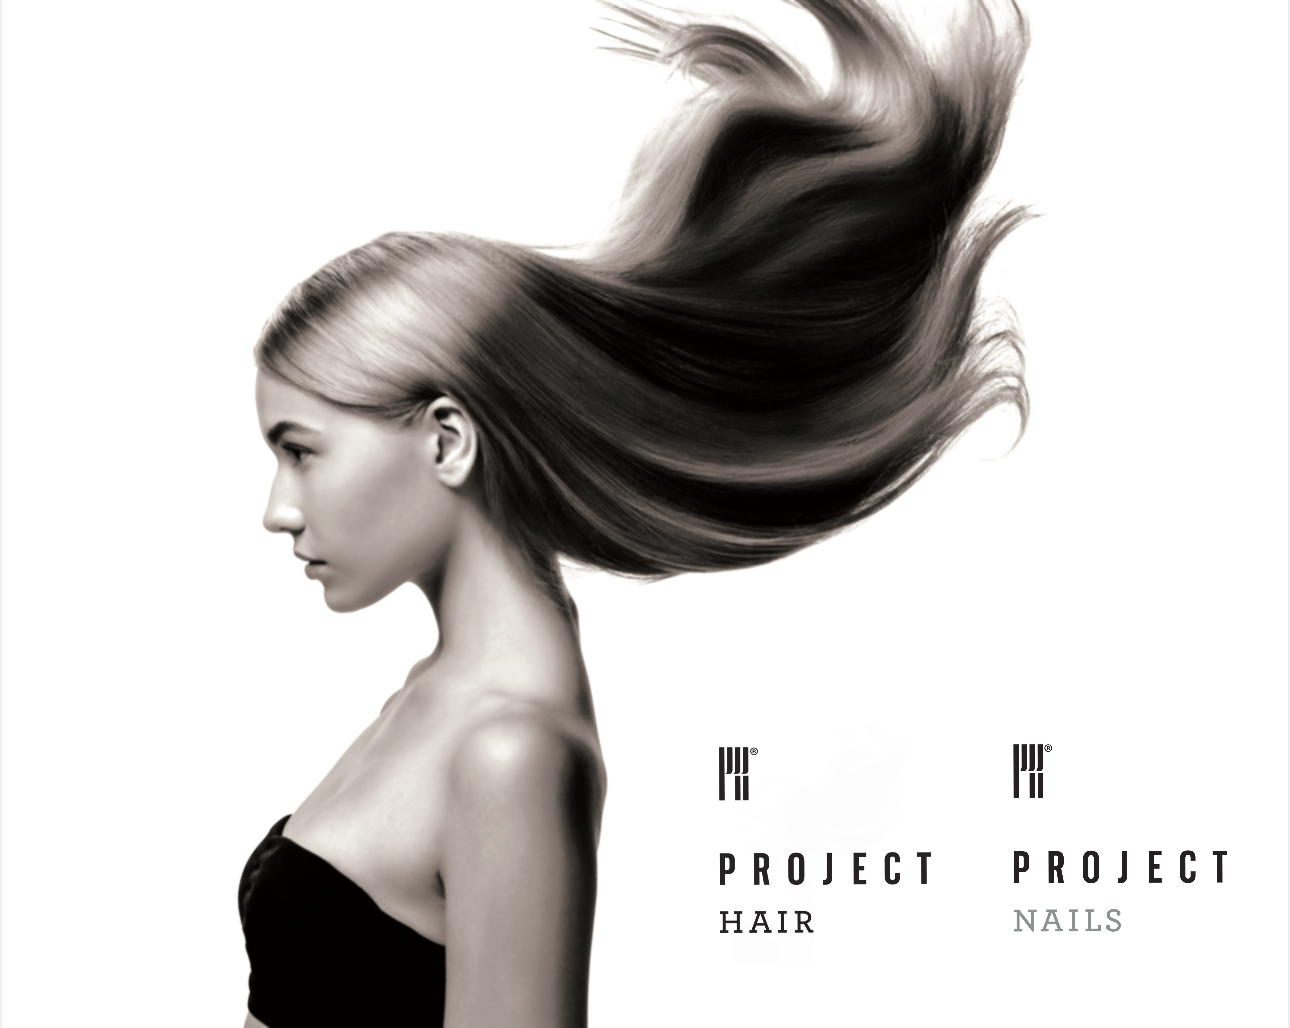 Project Hair & Project Nails SG